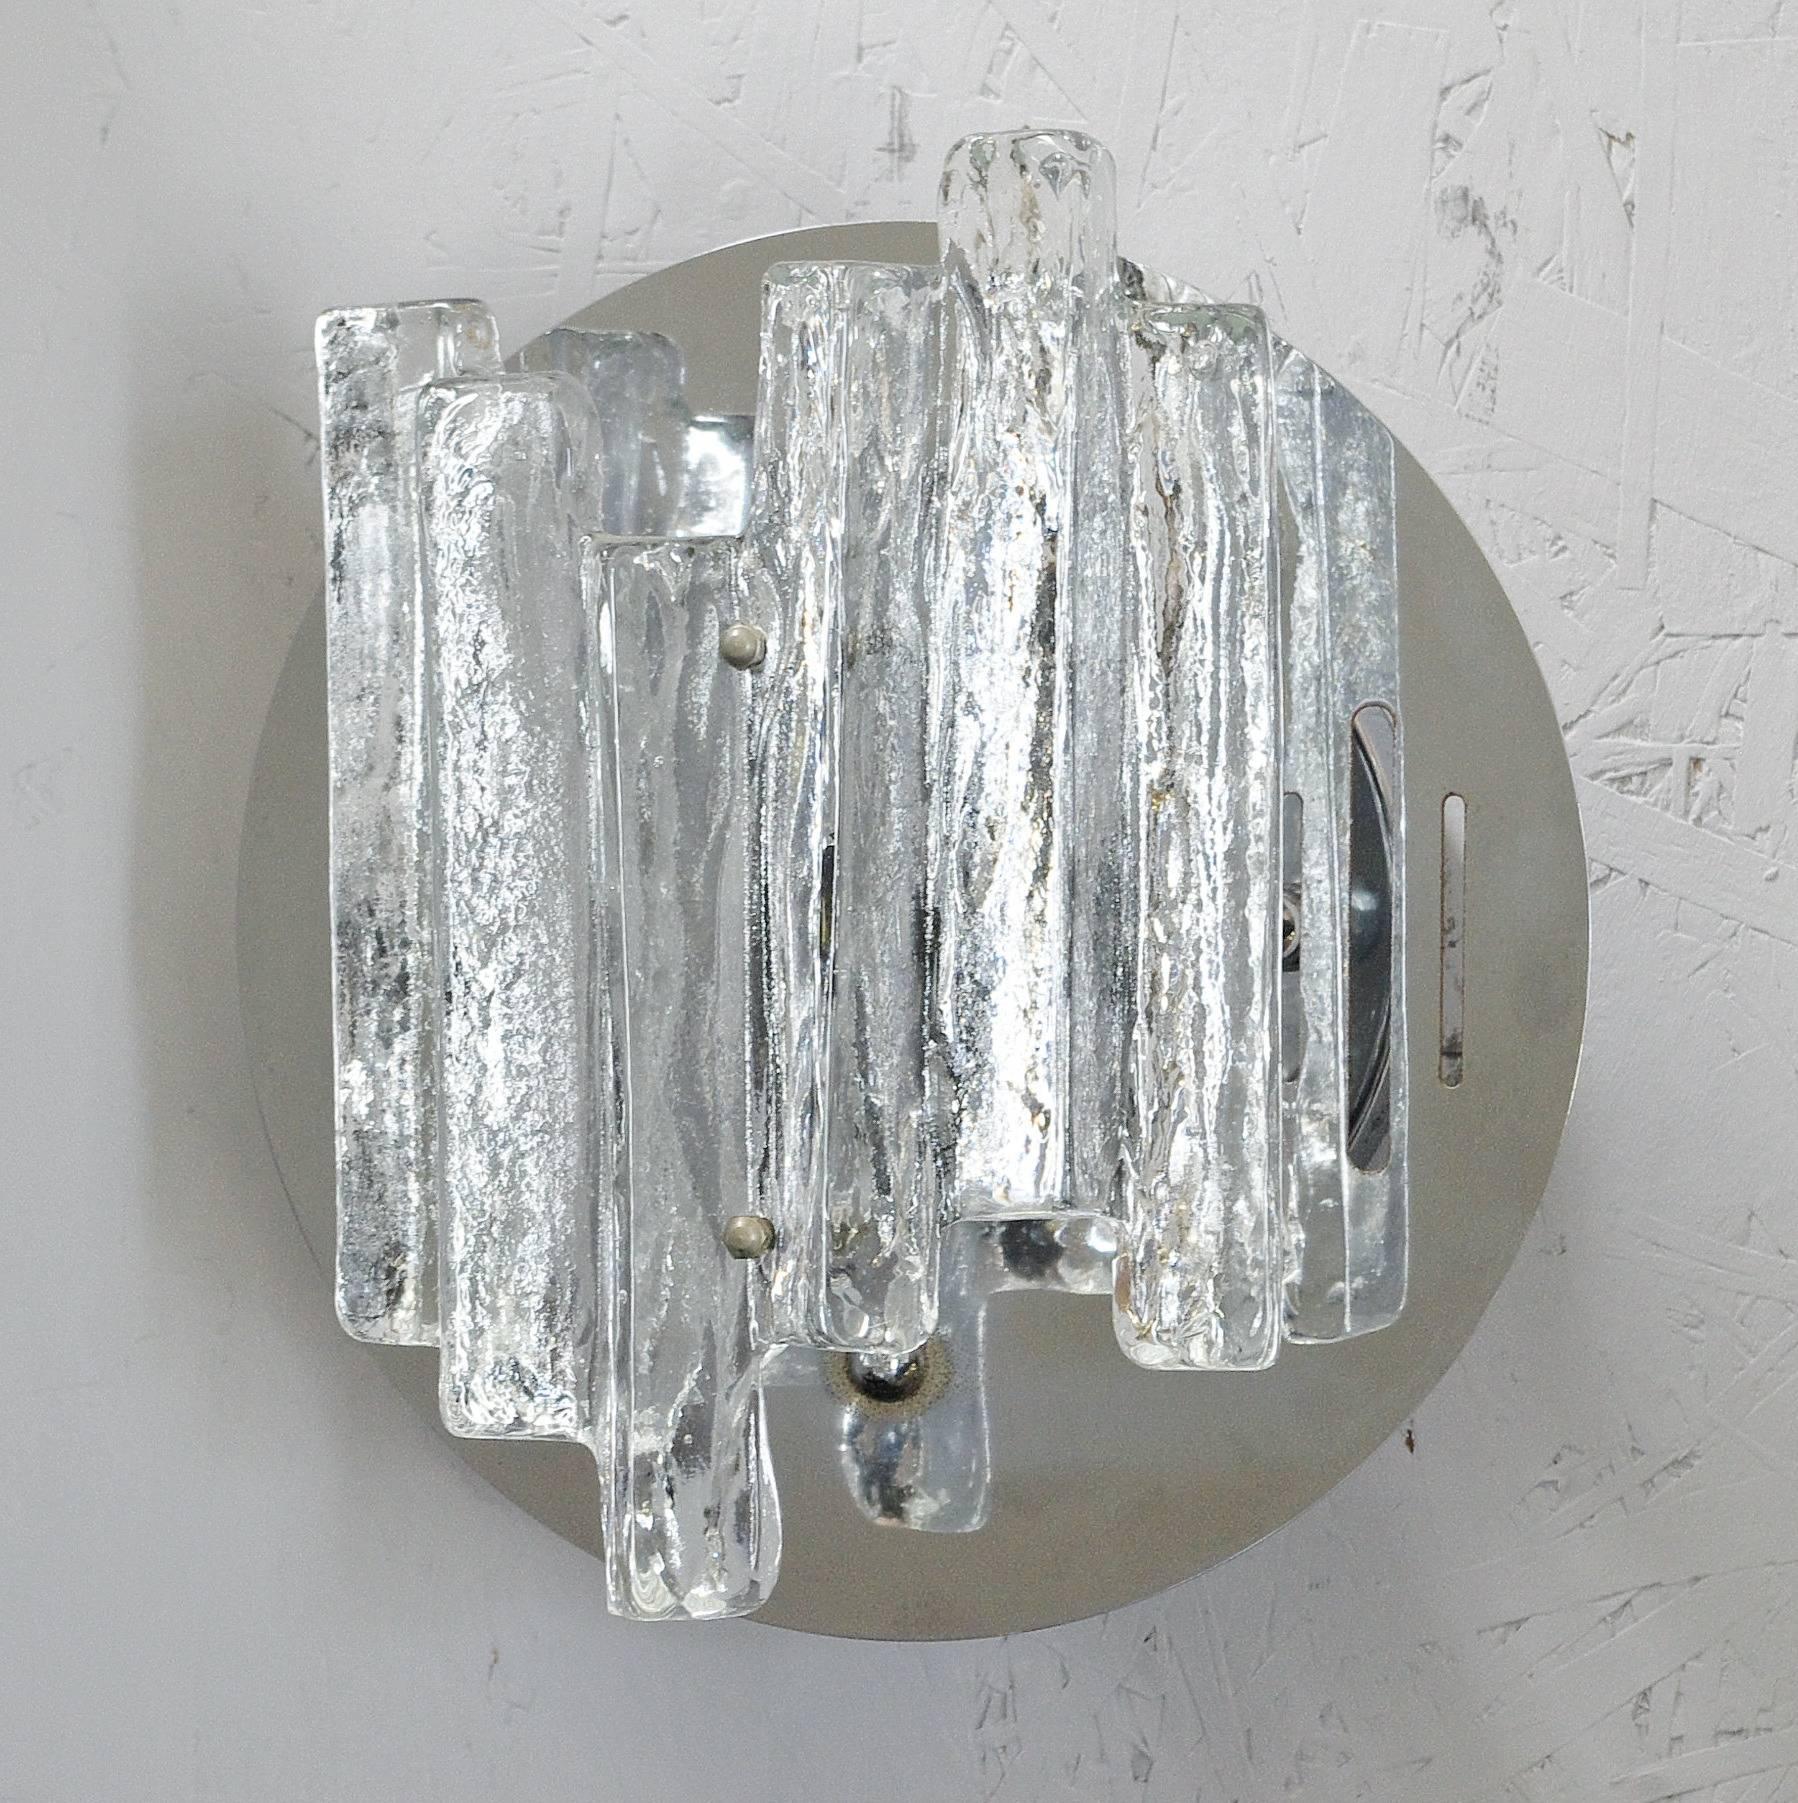 Three Italian wall lights or flush mounts with clear geometric Murano glass mounted on chrome metal frame / Designed by Salviati, circa 1960s / Made in Italy
1 light / E12 or E14 type / max 40W
Height: 11 inches /  Width: 13 inches / Depth: 8 inches